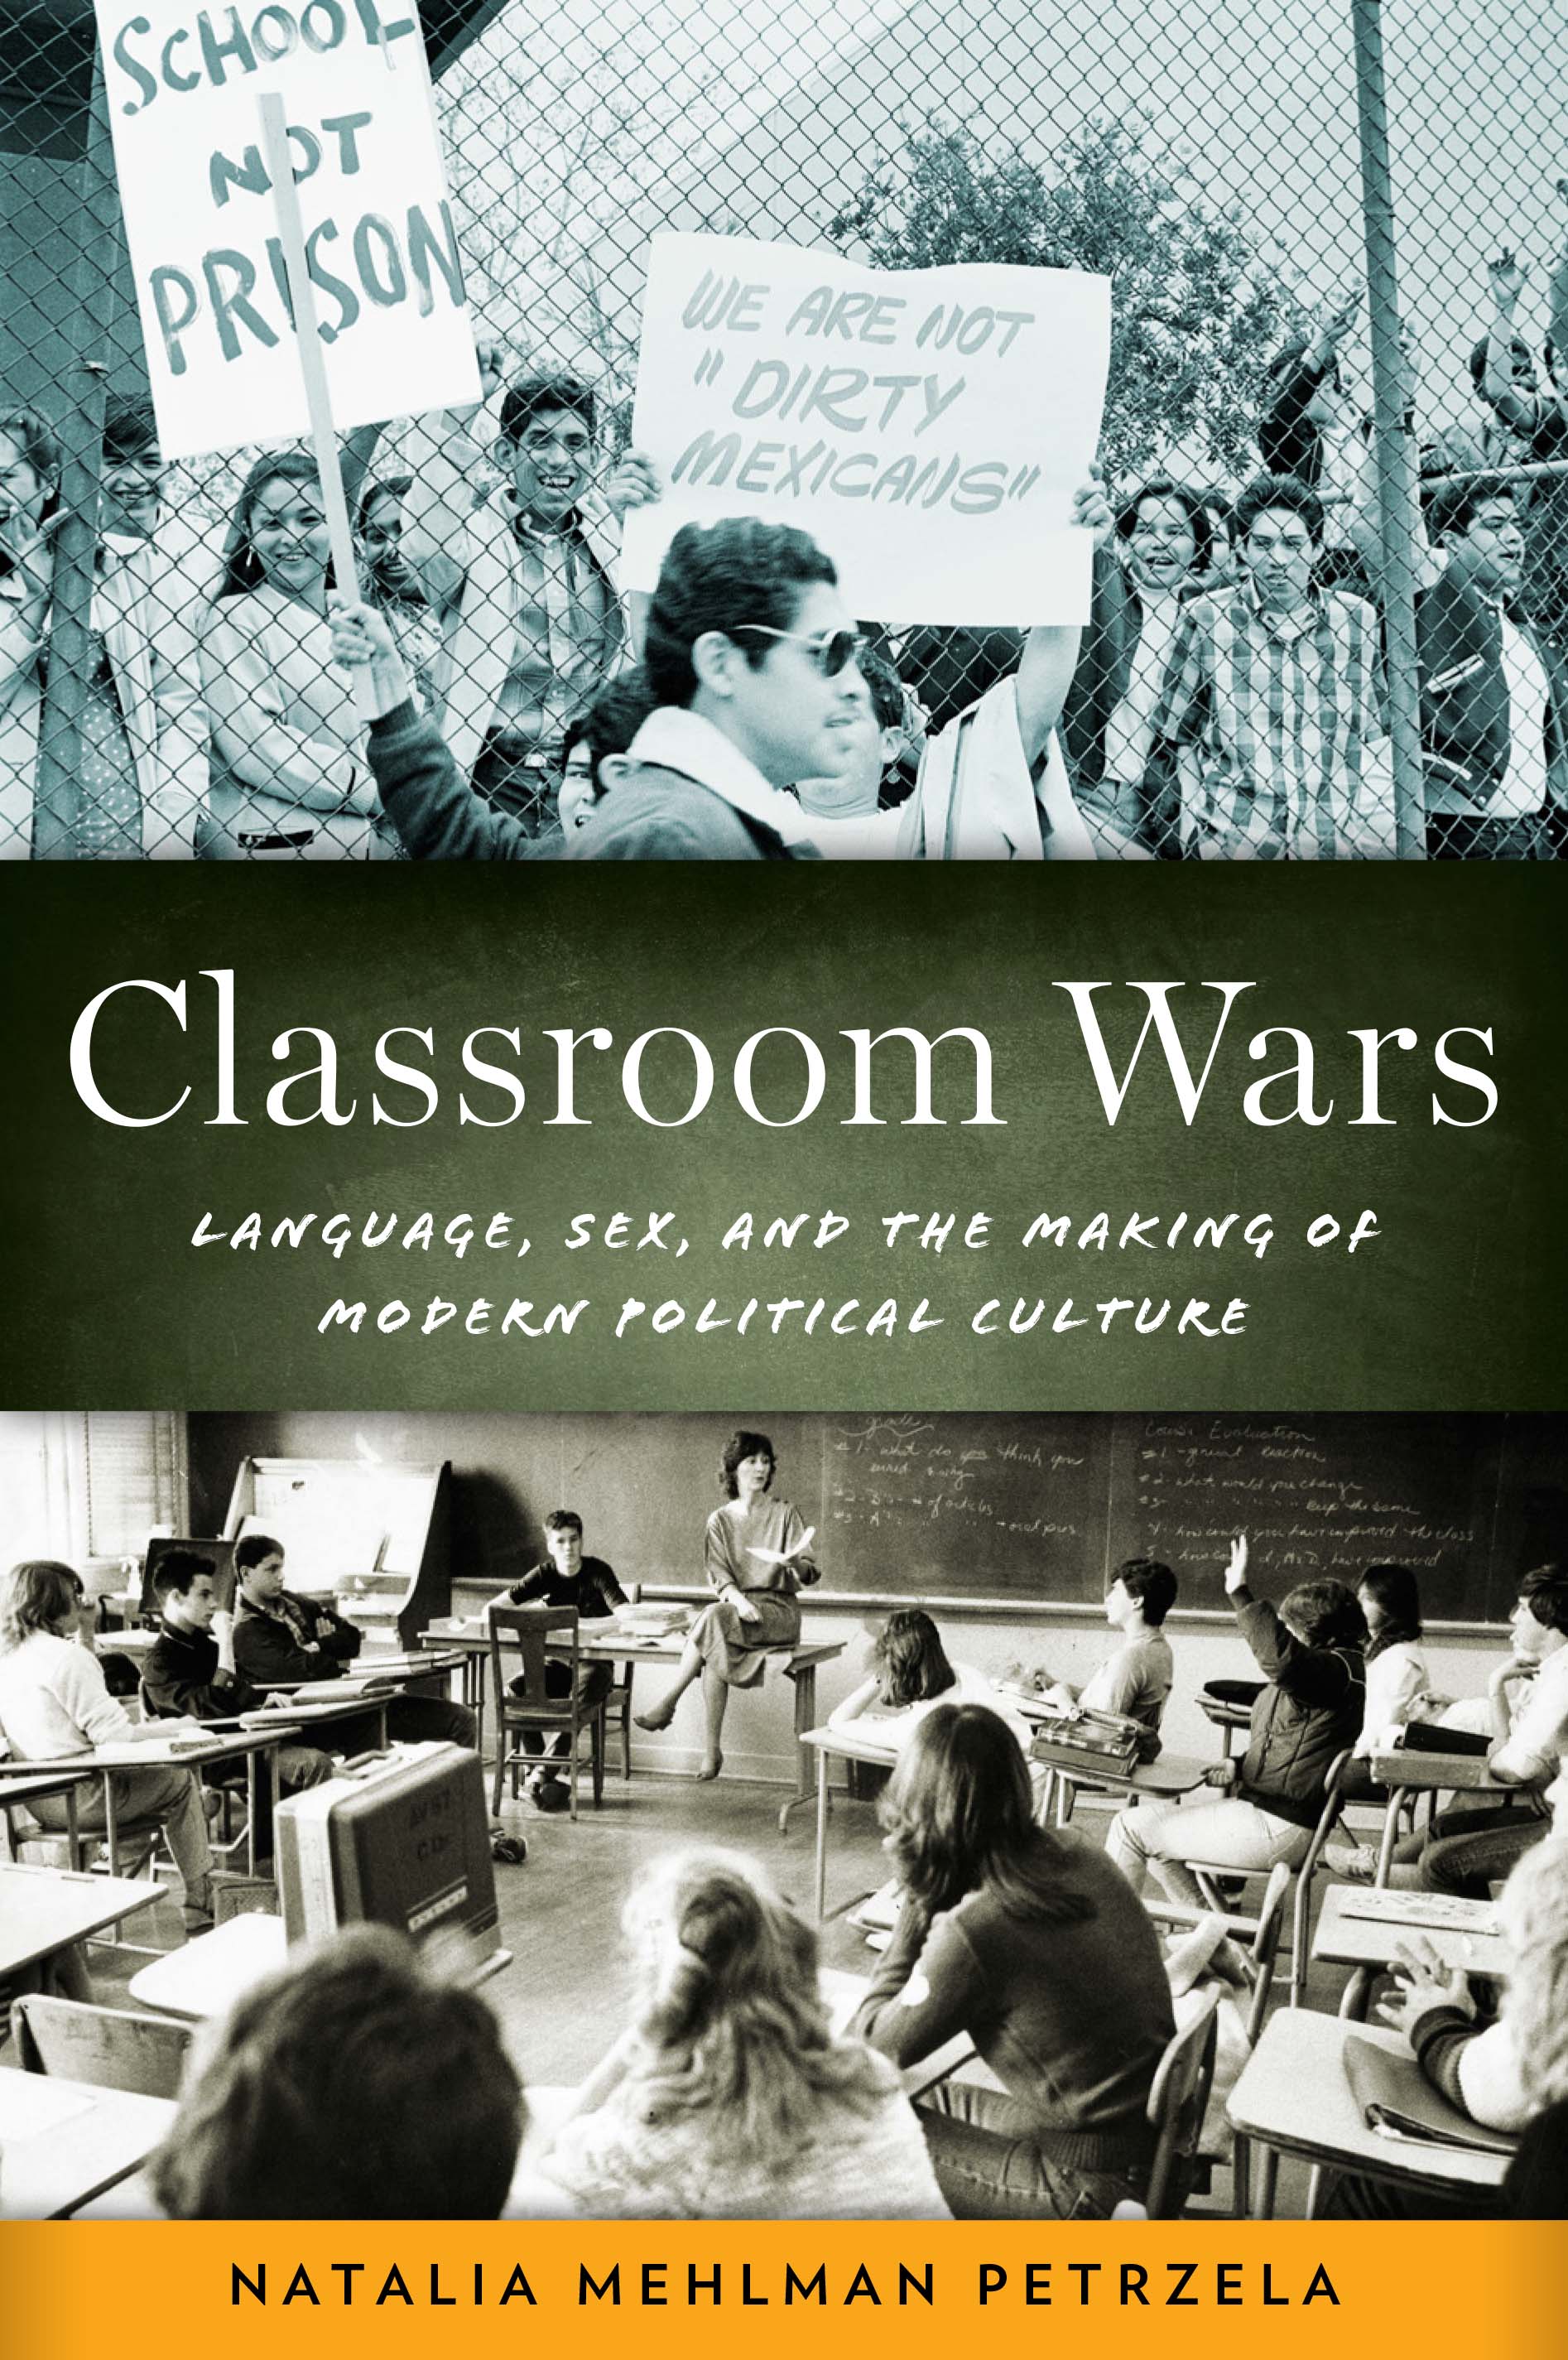 Historian Natalia Mehlman Petrzela’s new book, CLASSROOM WARS: LANGUAGE, SEX, AND THE MAKING OF MODERN POLITICAL CULTURE OUT FROM OXFORD UNIVERSITY PRESS!